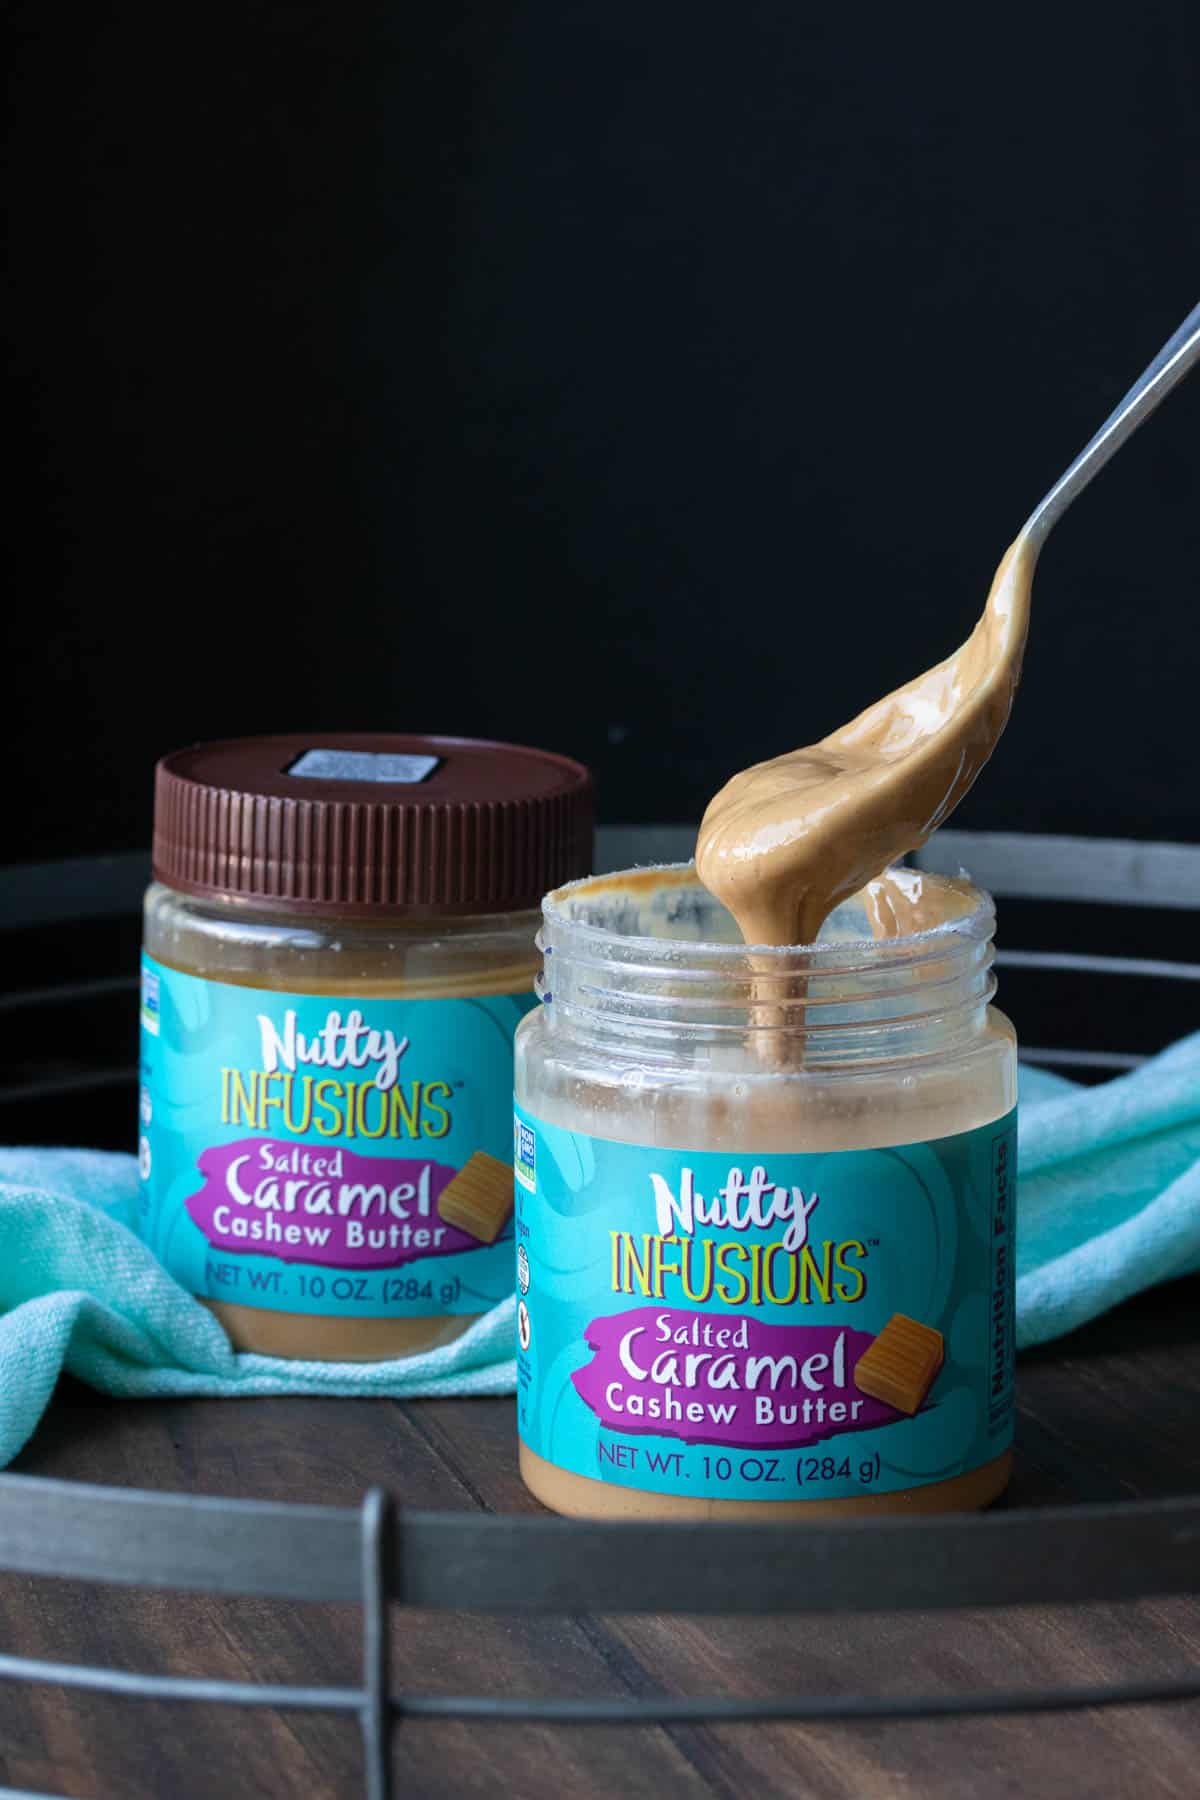 Spoon dripping cashew butter into a jar of cashew butter with a turquoise label.